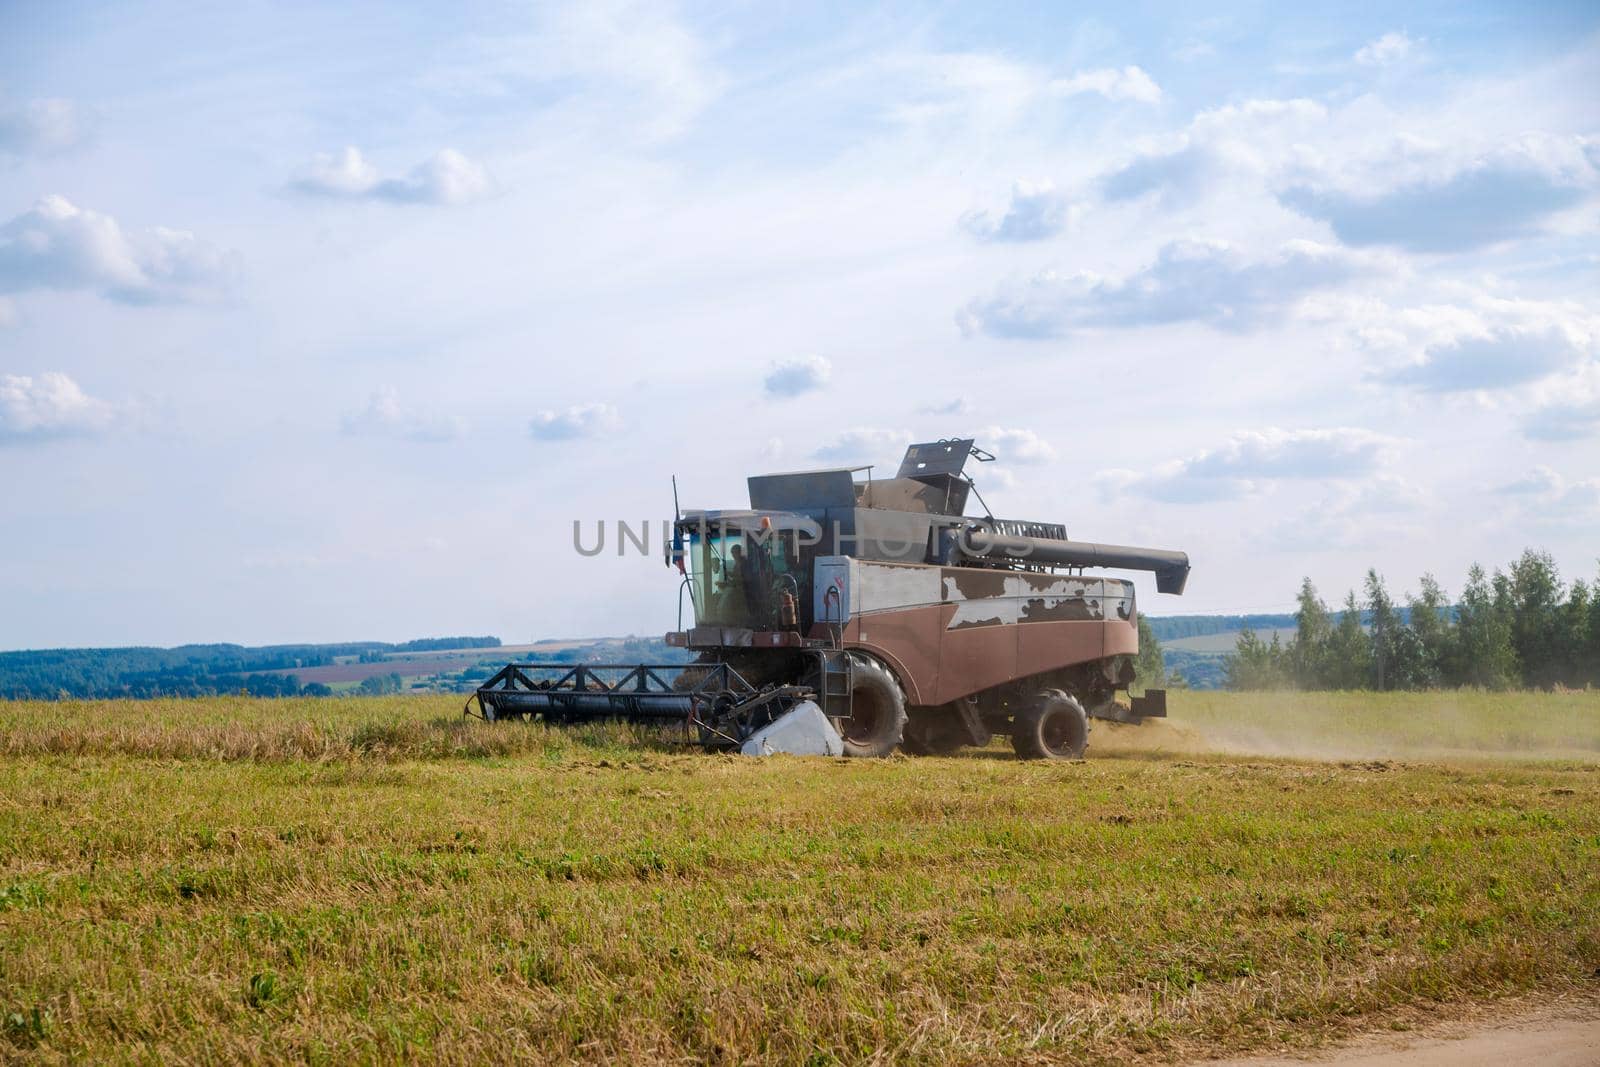 old tracktor plows the field. harvester harvests wheat from a sown agricultural field by Mariaprovector